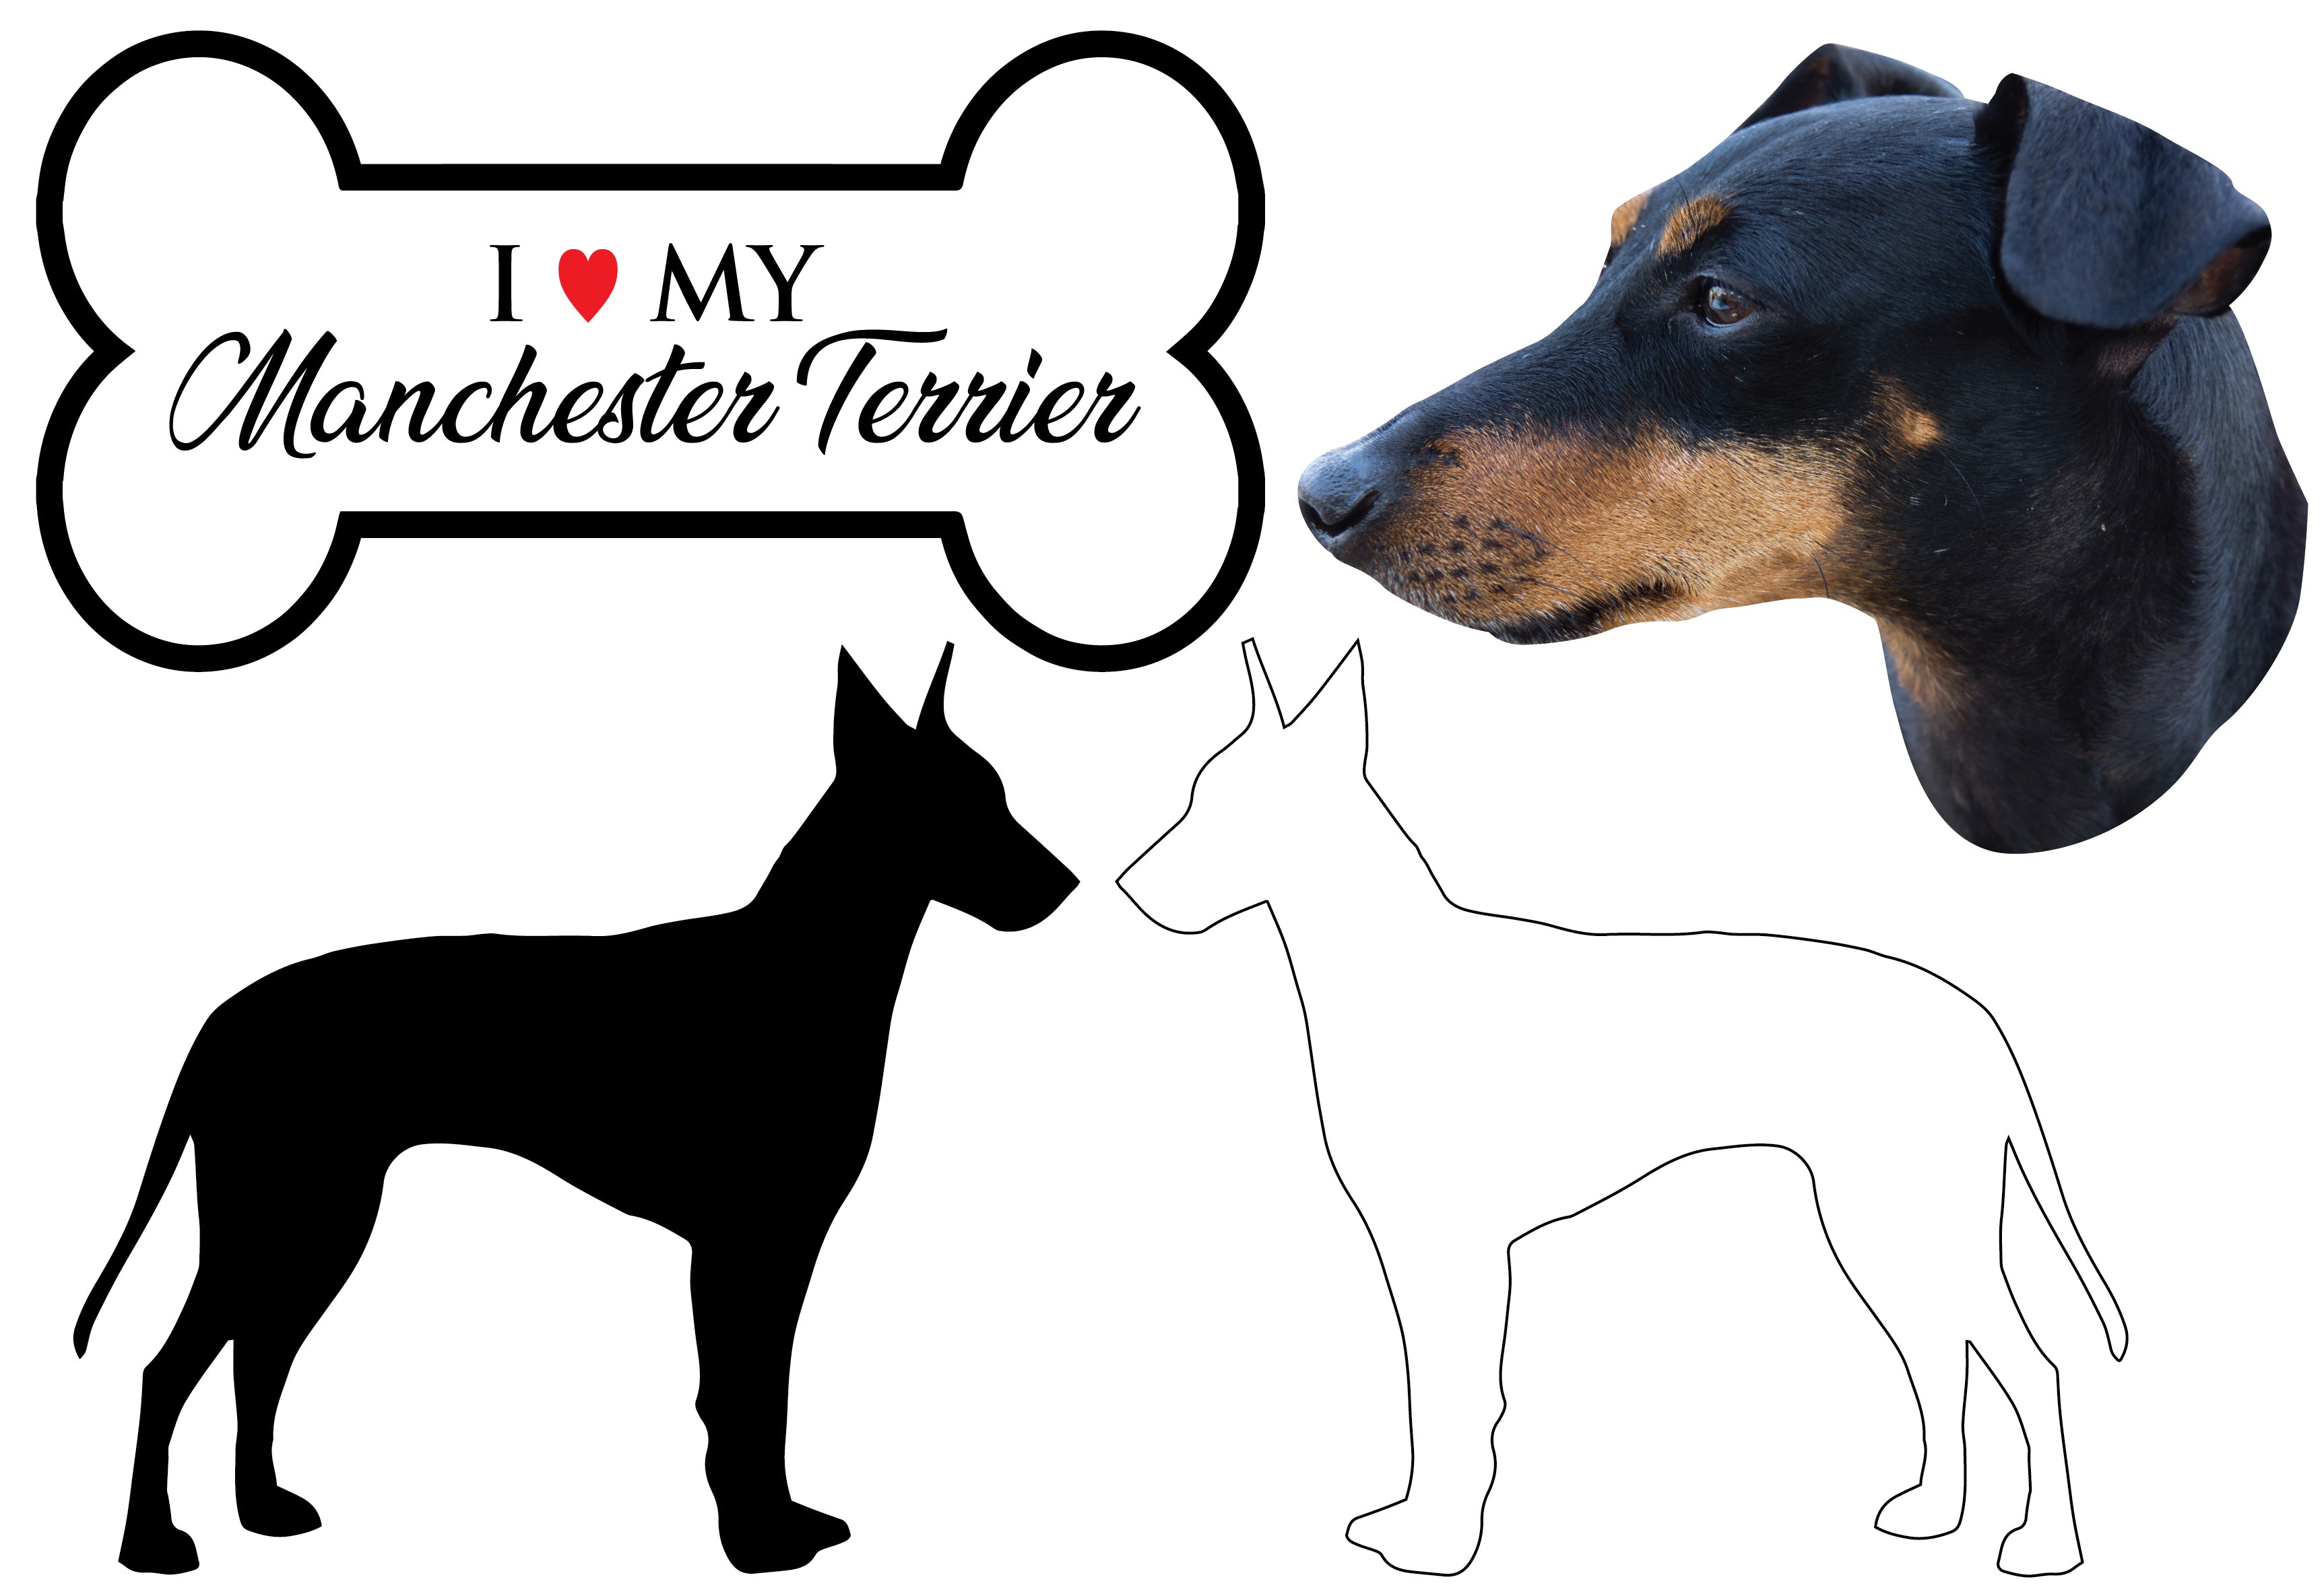 Manchester Terrier - Dog Breed Decals (Set of 16) - Sizes in Description